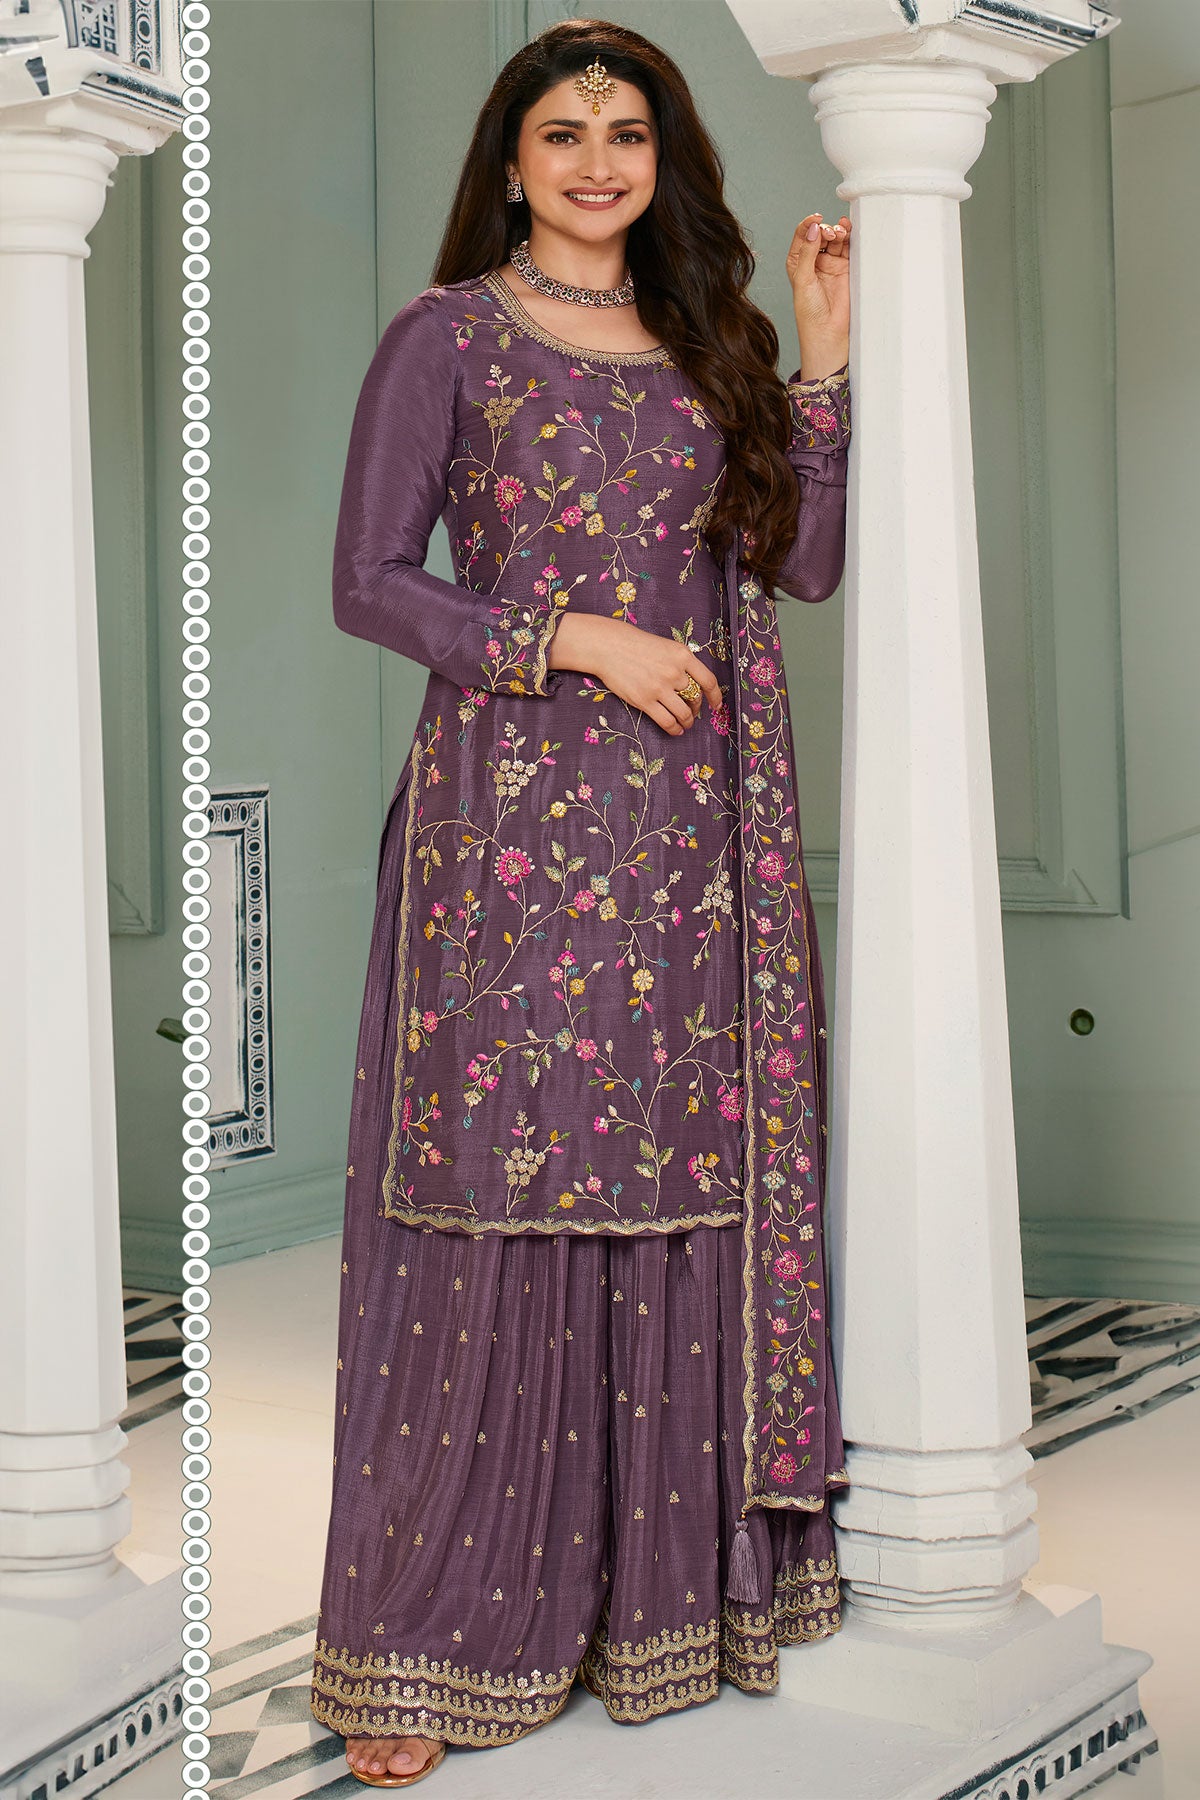 Mauve Blended Silk Floral Threadwork Sequins and Zari Embroidered Sharara Suit Set